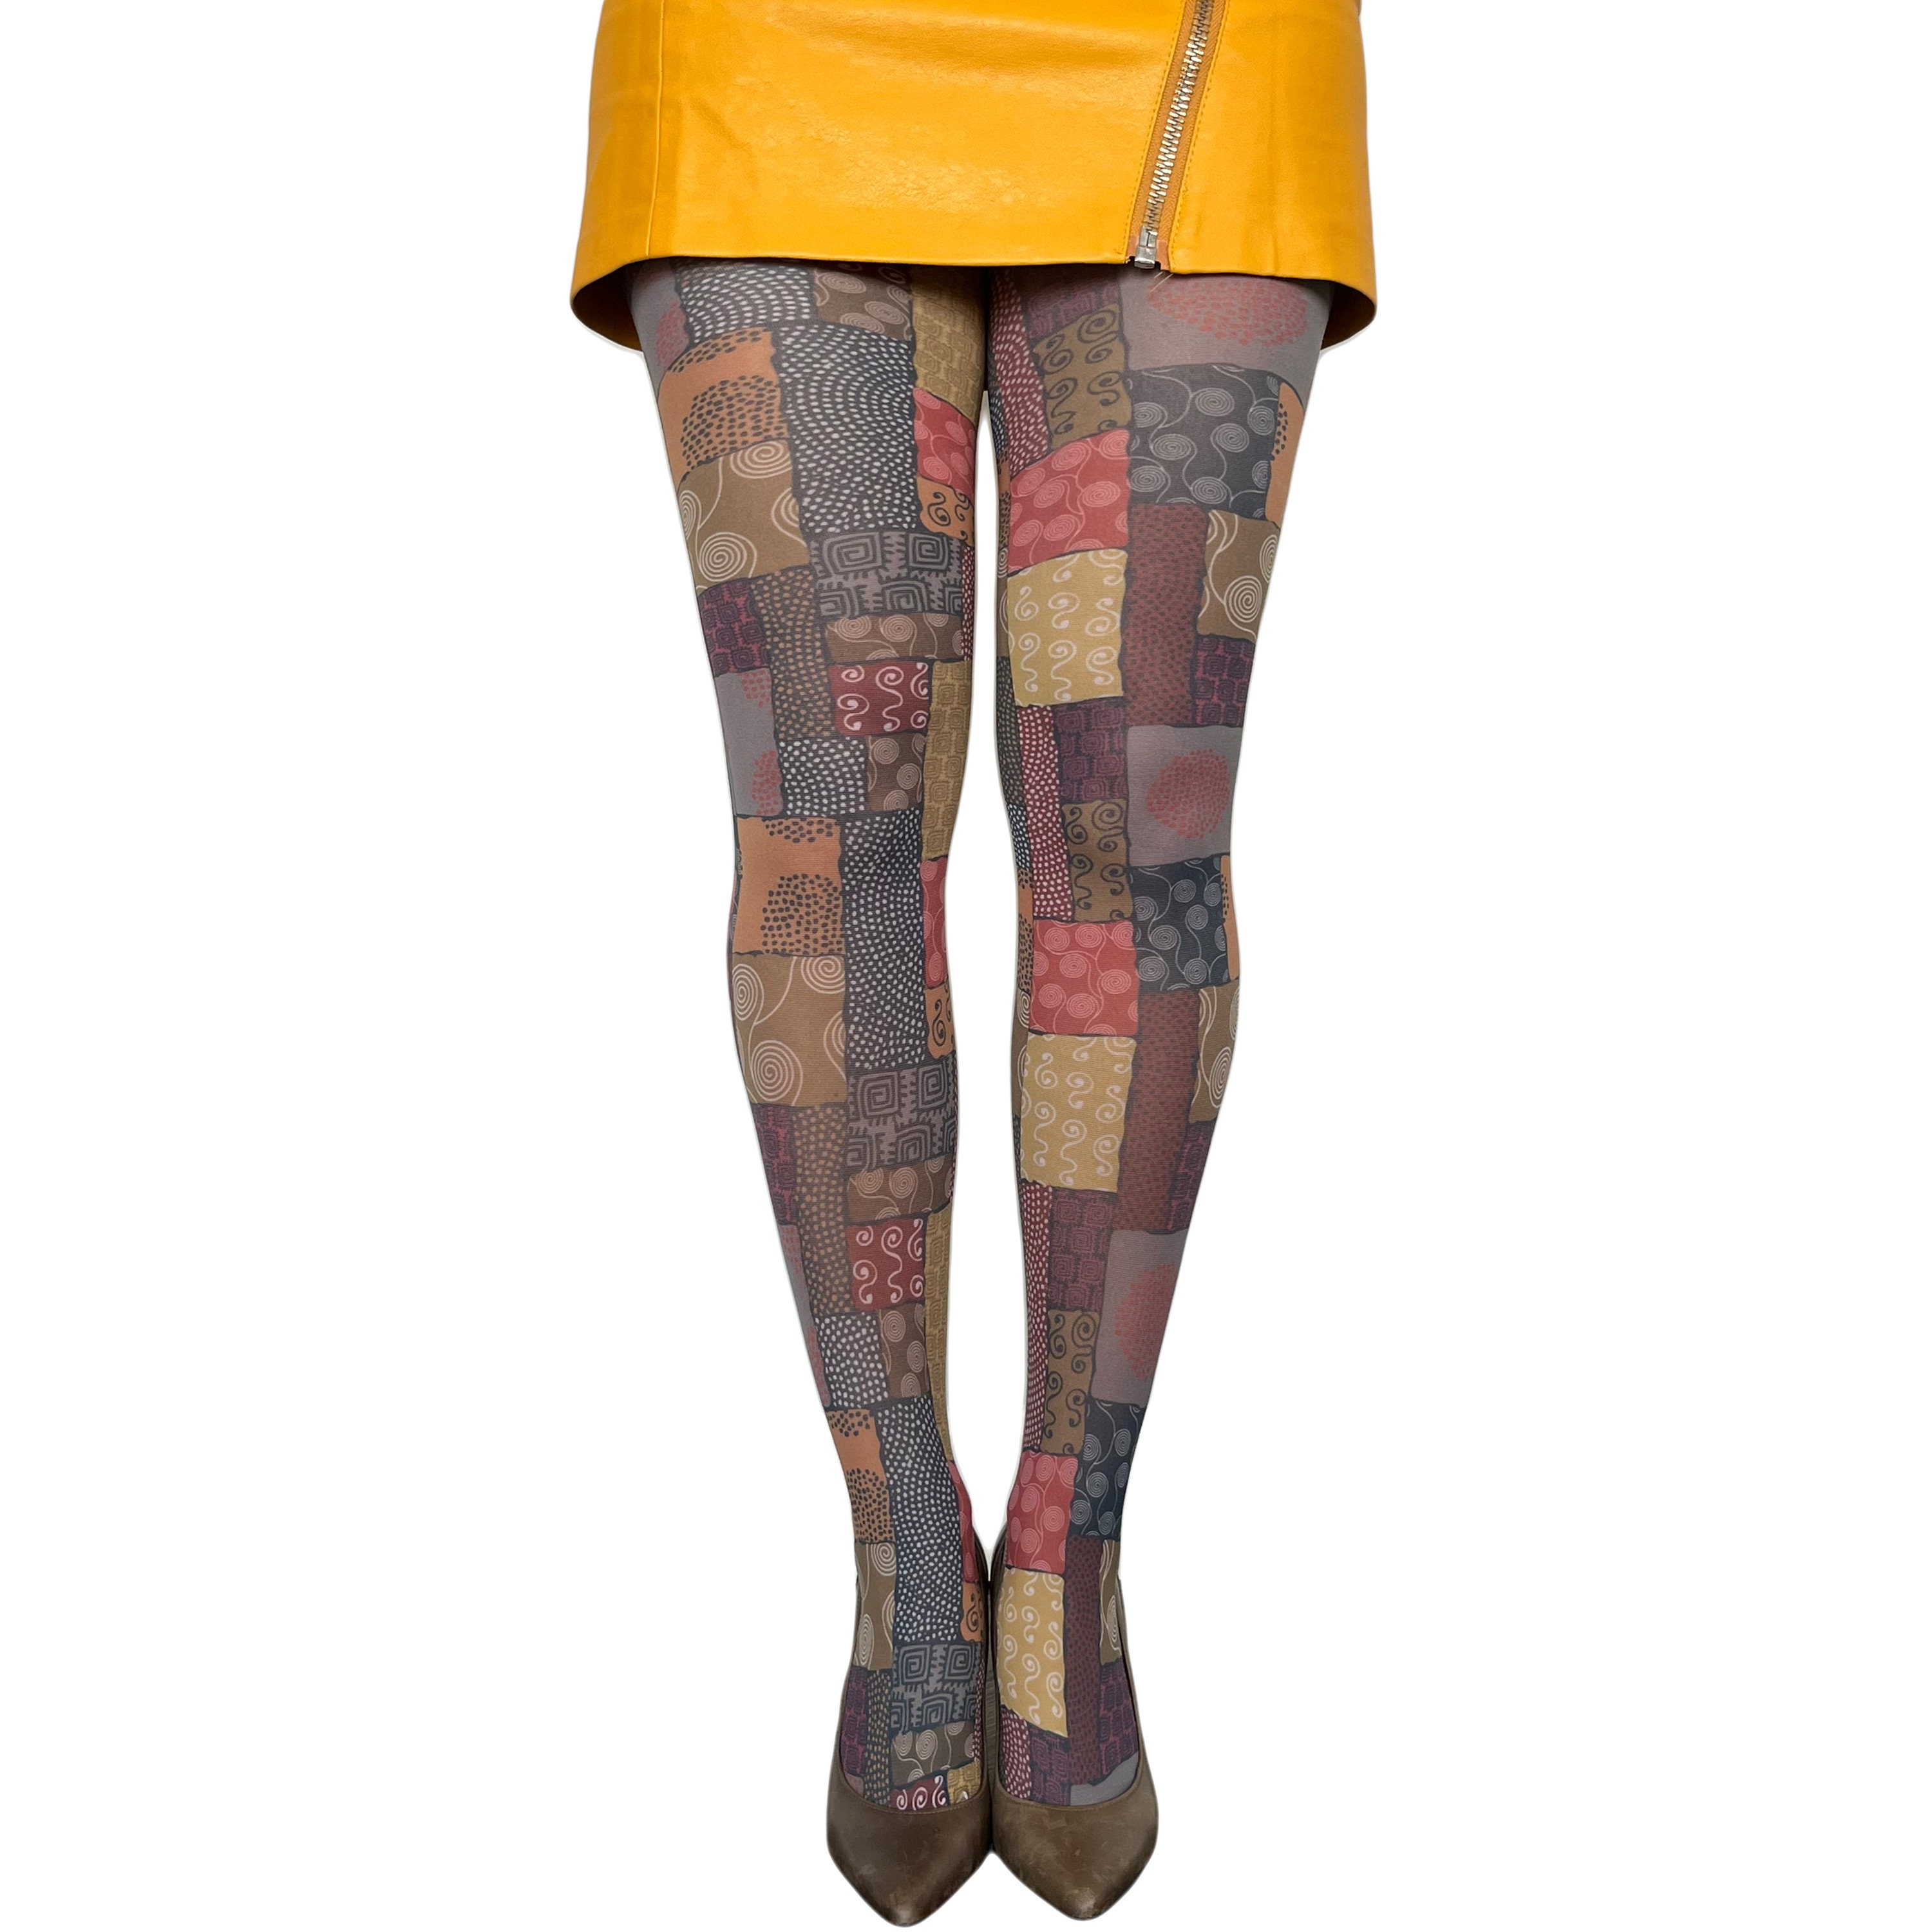 Indica' Gucci INSPIRED tights